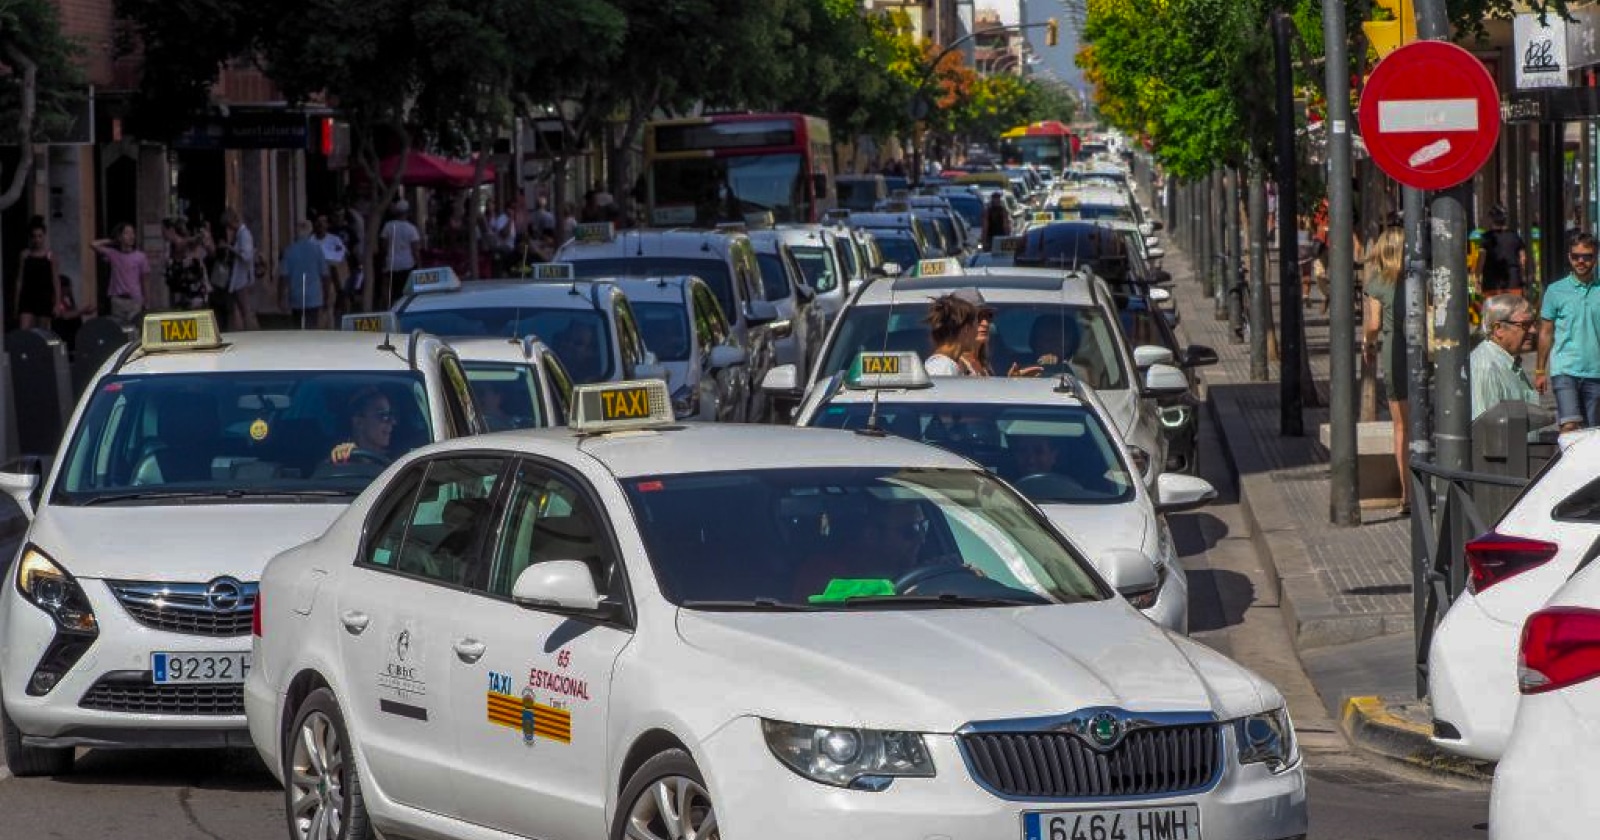 Uber in Ibiza? The Next Best Thing 14